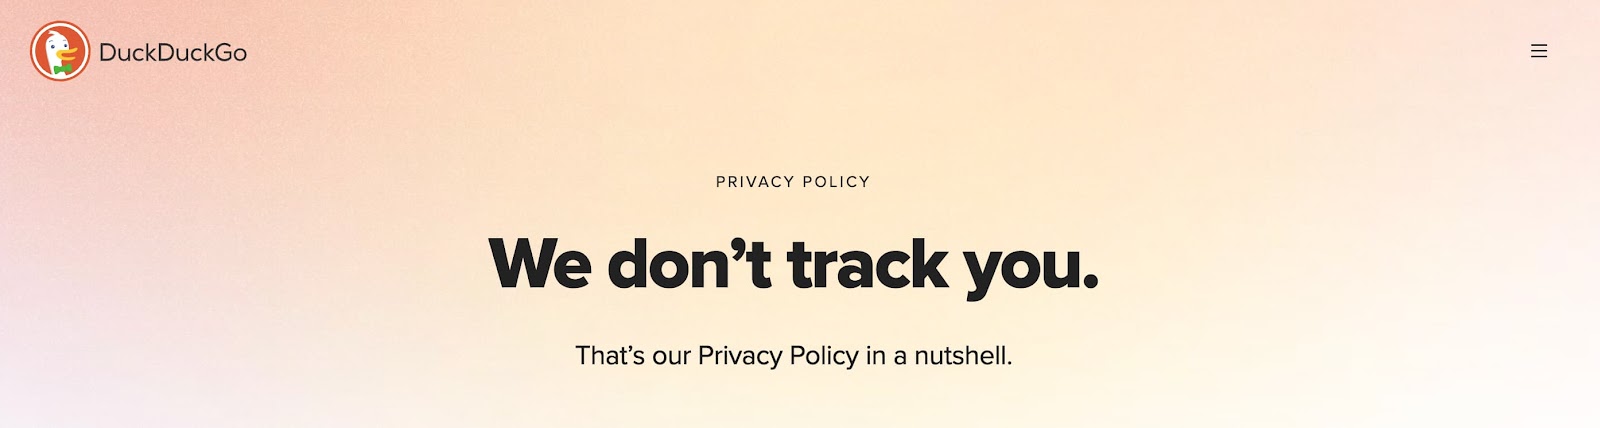 DuckDuckGo’s privacy policy: We don’t track you. That’s our Privacy Policy in a nutshell.